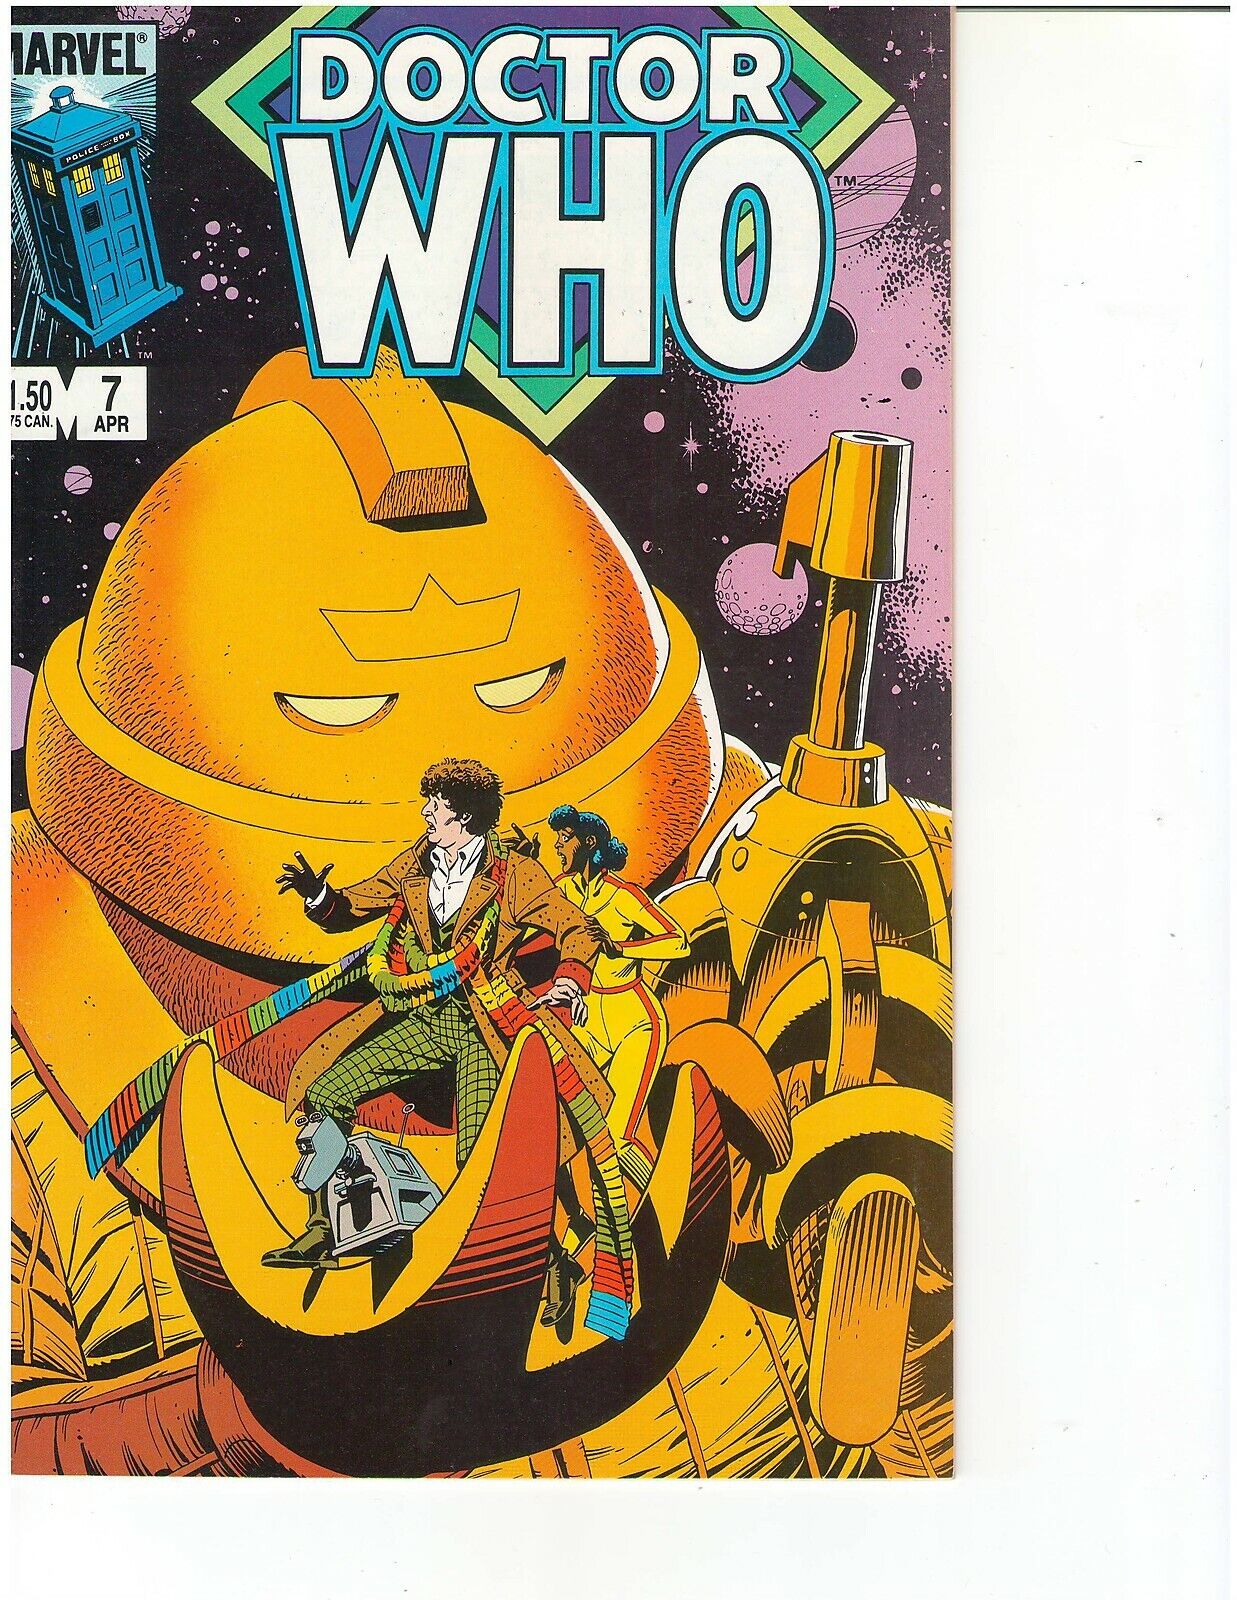 Doctor Who #7 (Apr 1985, Marvel) NEVER READ BAGGED BOARDED